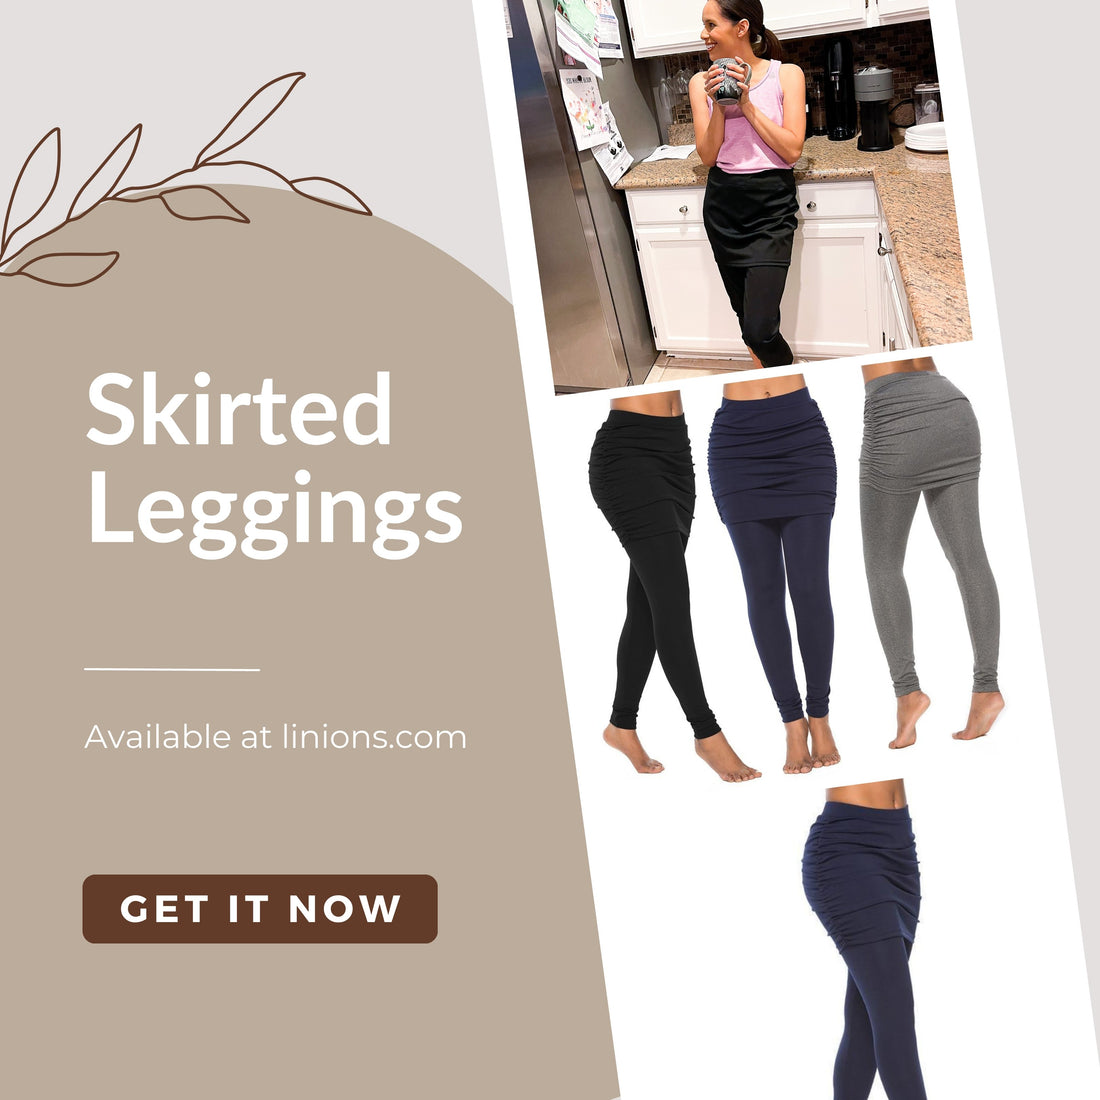 Guide to Skirt Leggings: The 2-in-1 Fashion Trend You'll Love - Linions